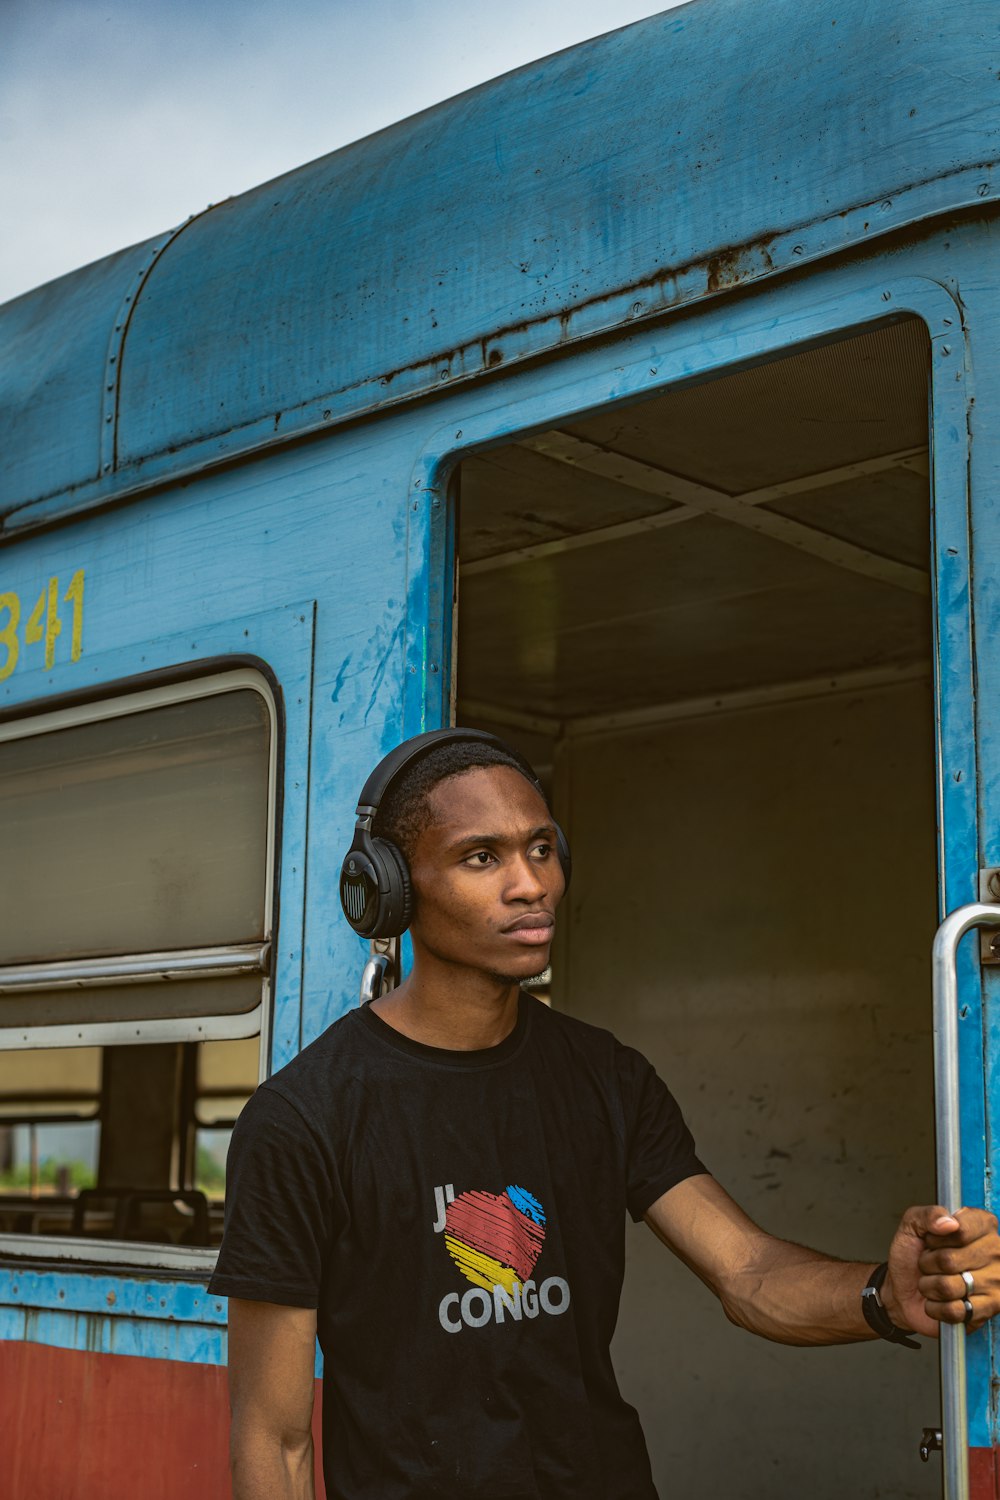 a man with headphones standing in the doorway of a train